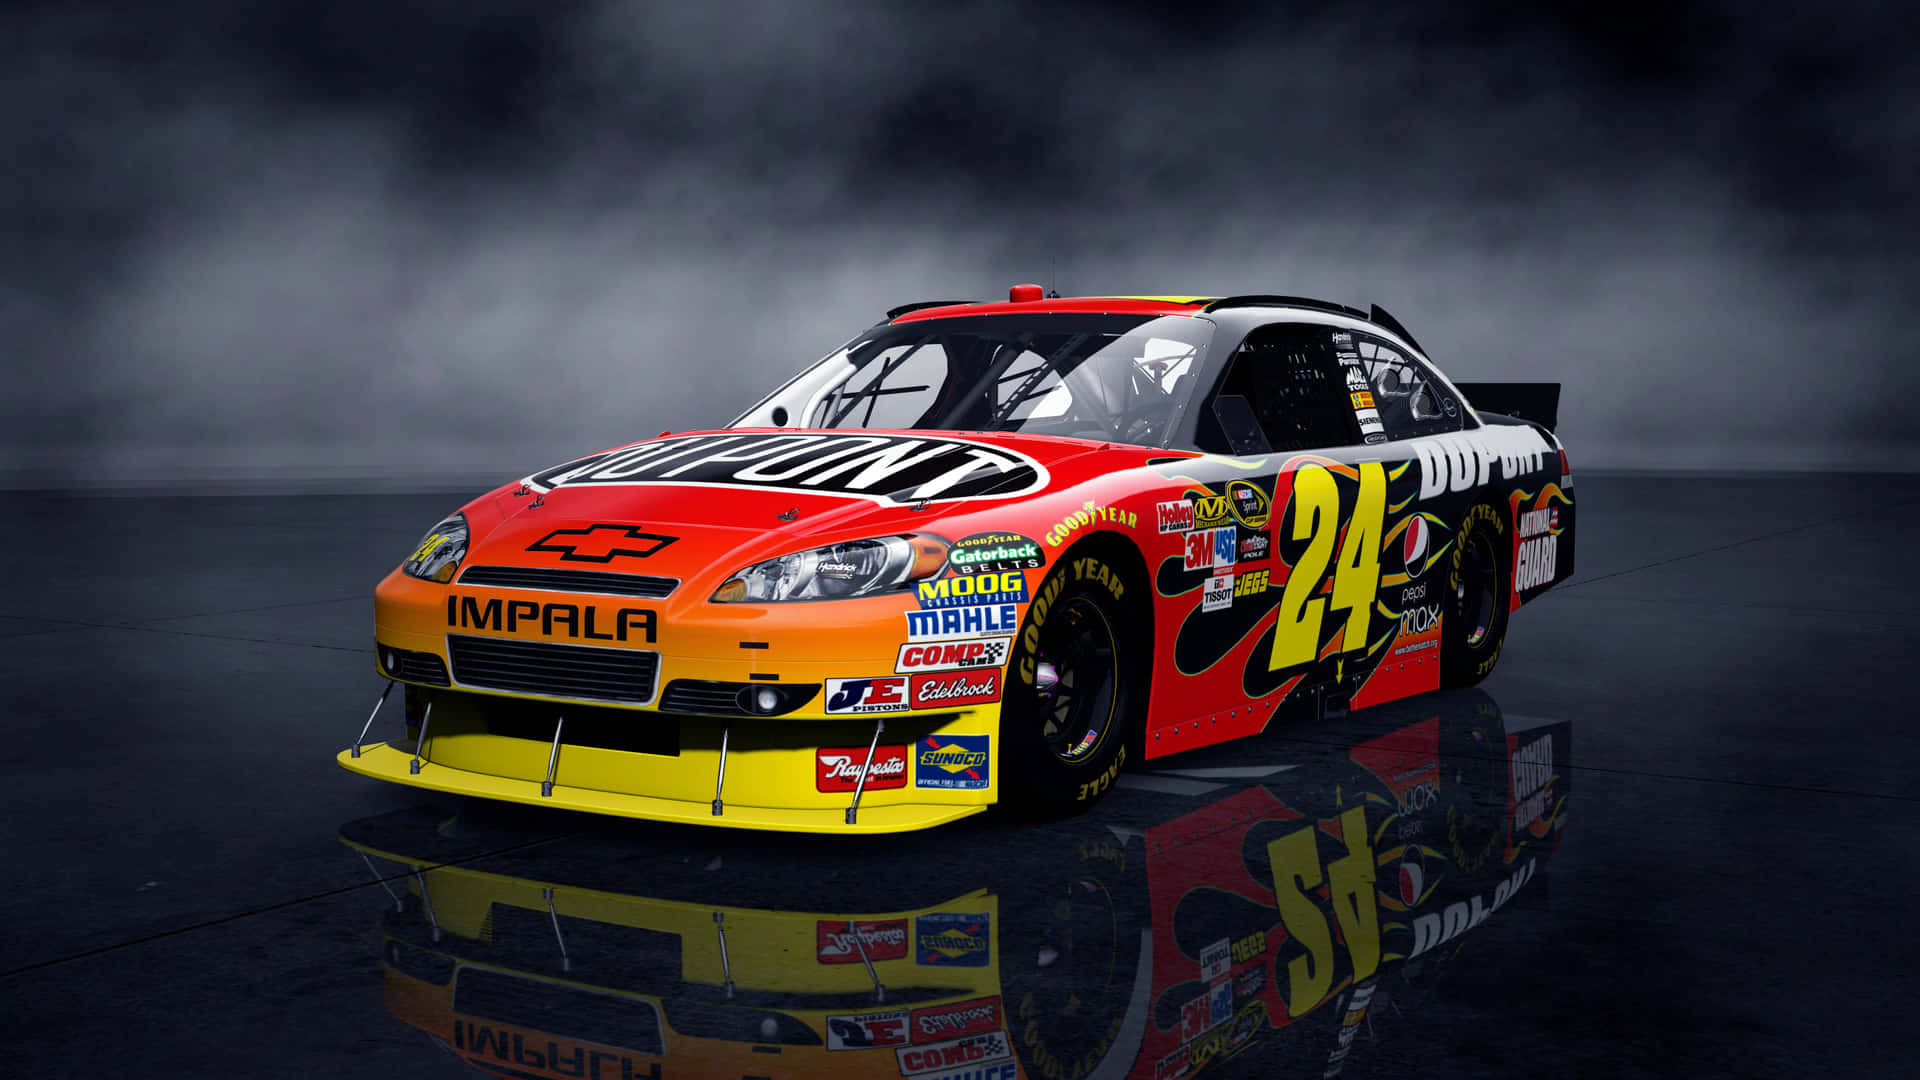 A Nascar Car Is Shown In A Dark Environment Background